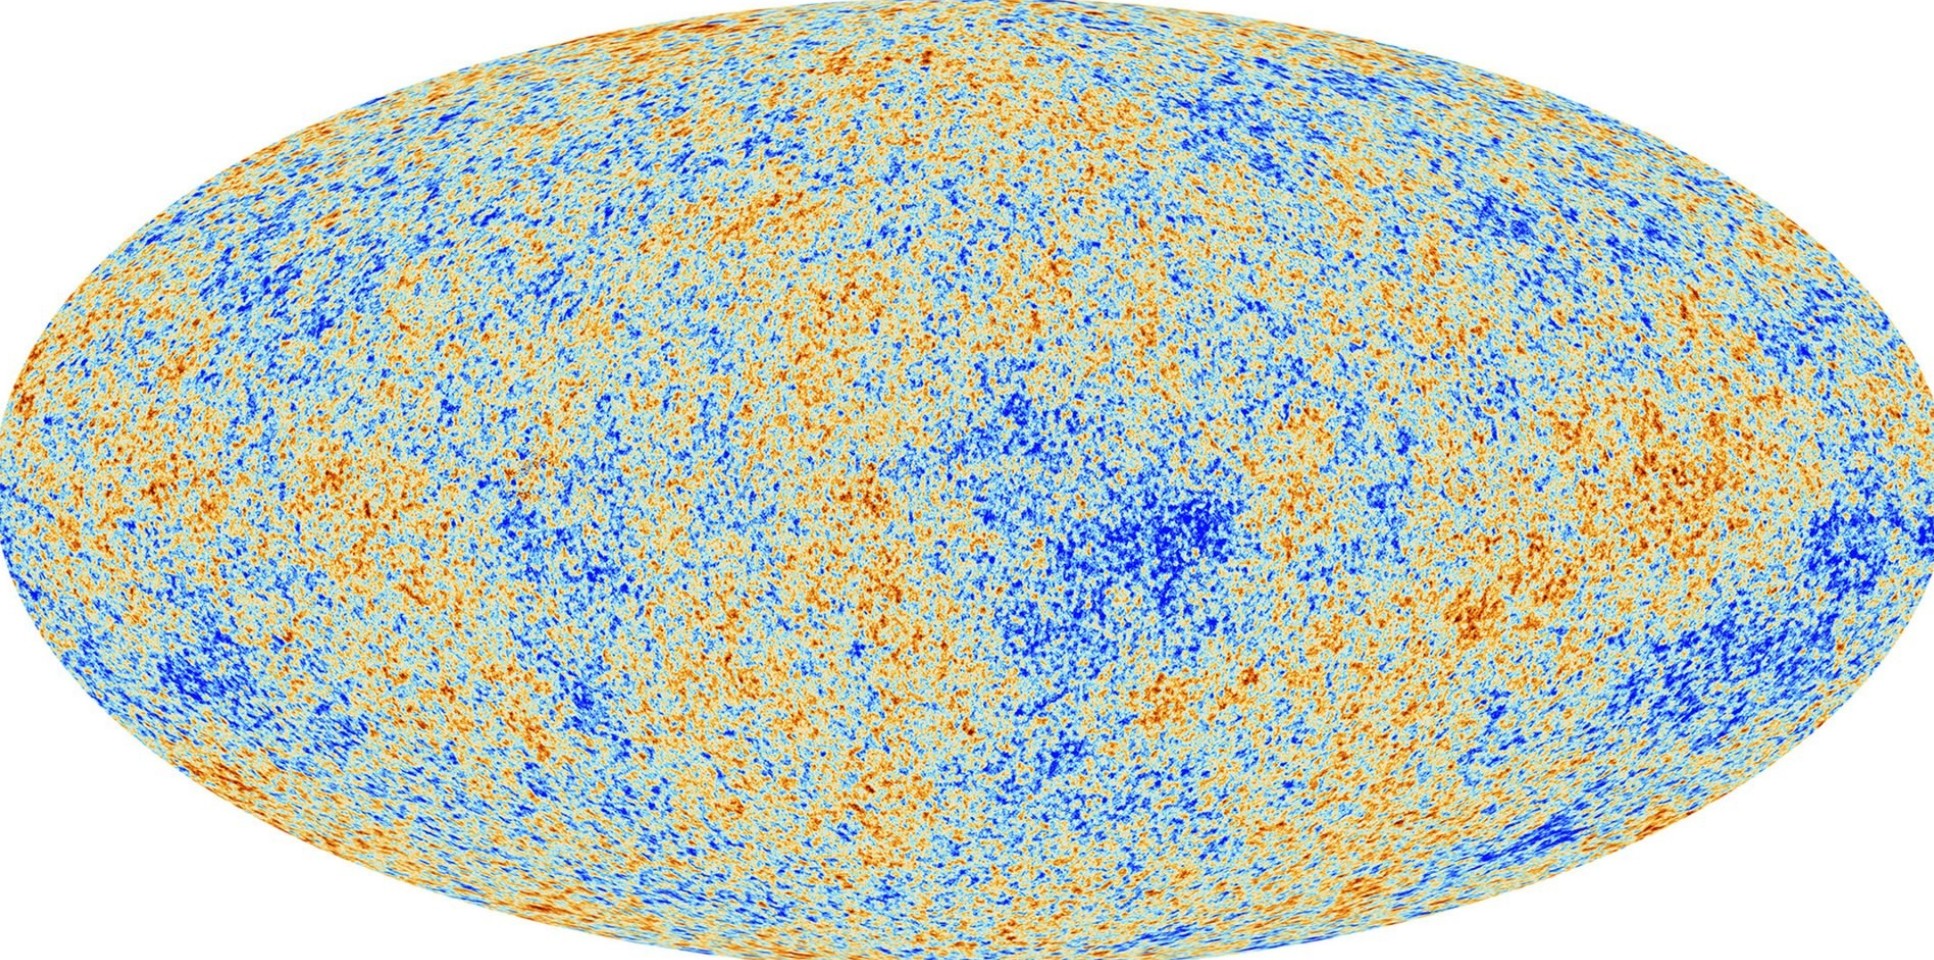 An image of cosmic microwave background (CMB) radiation.